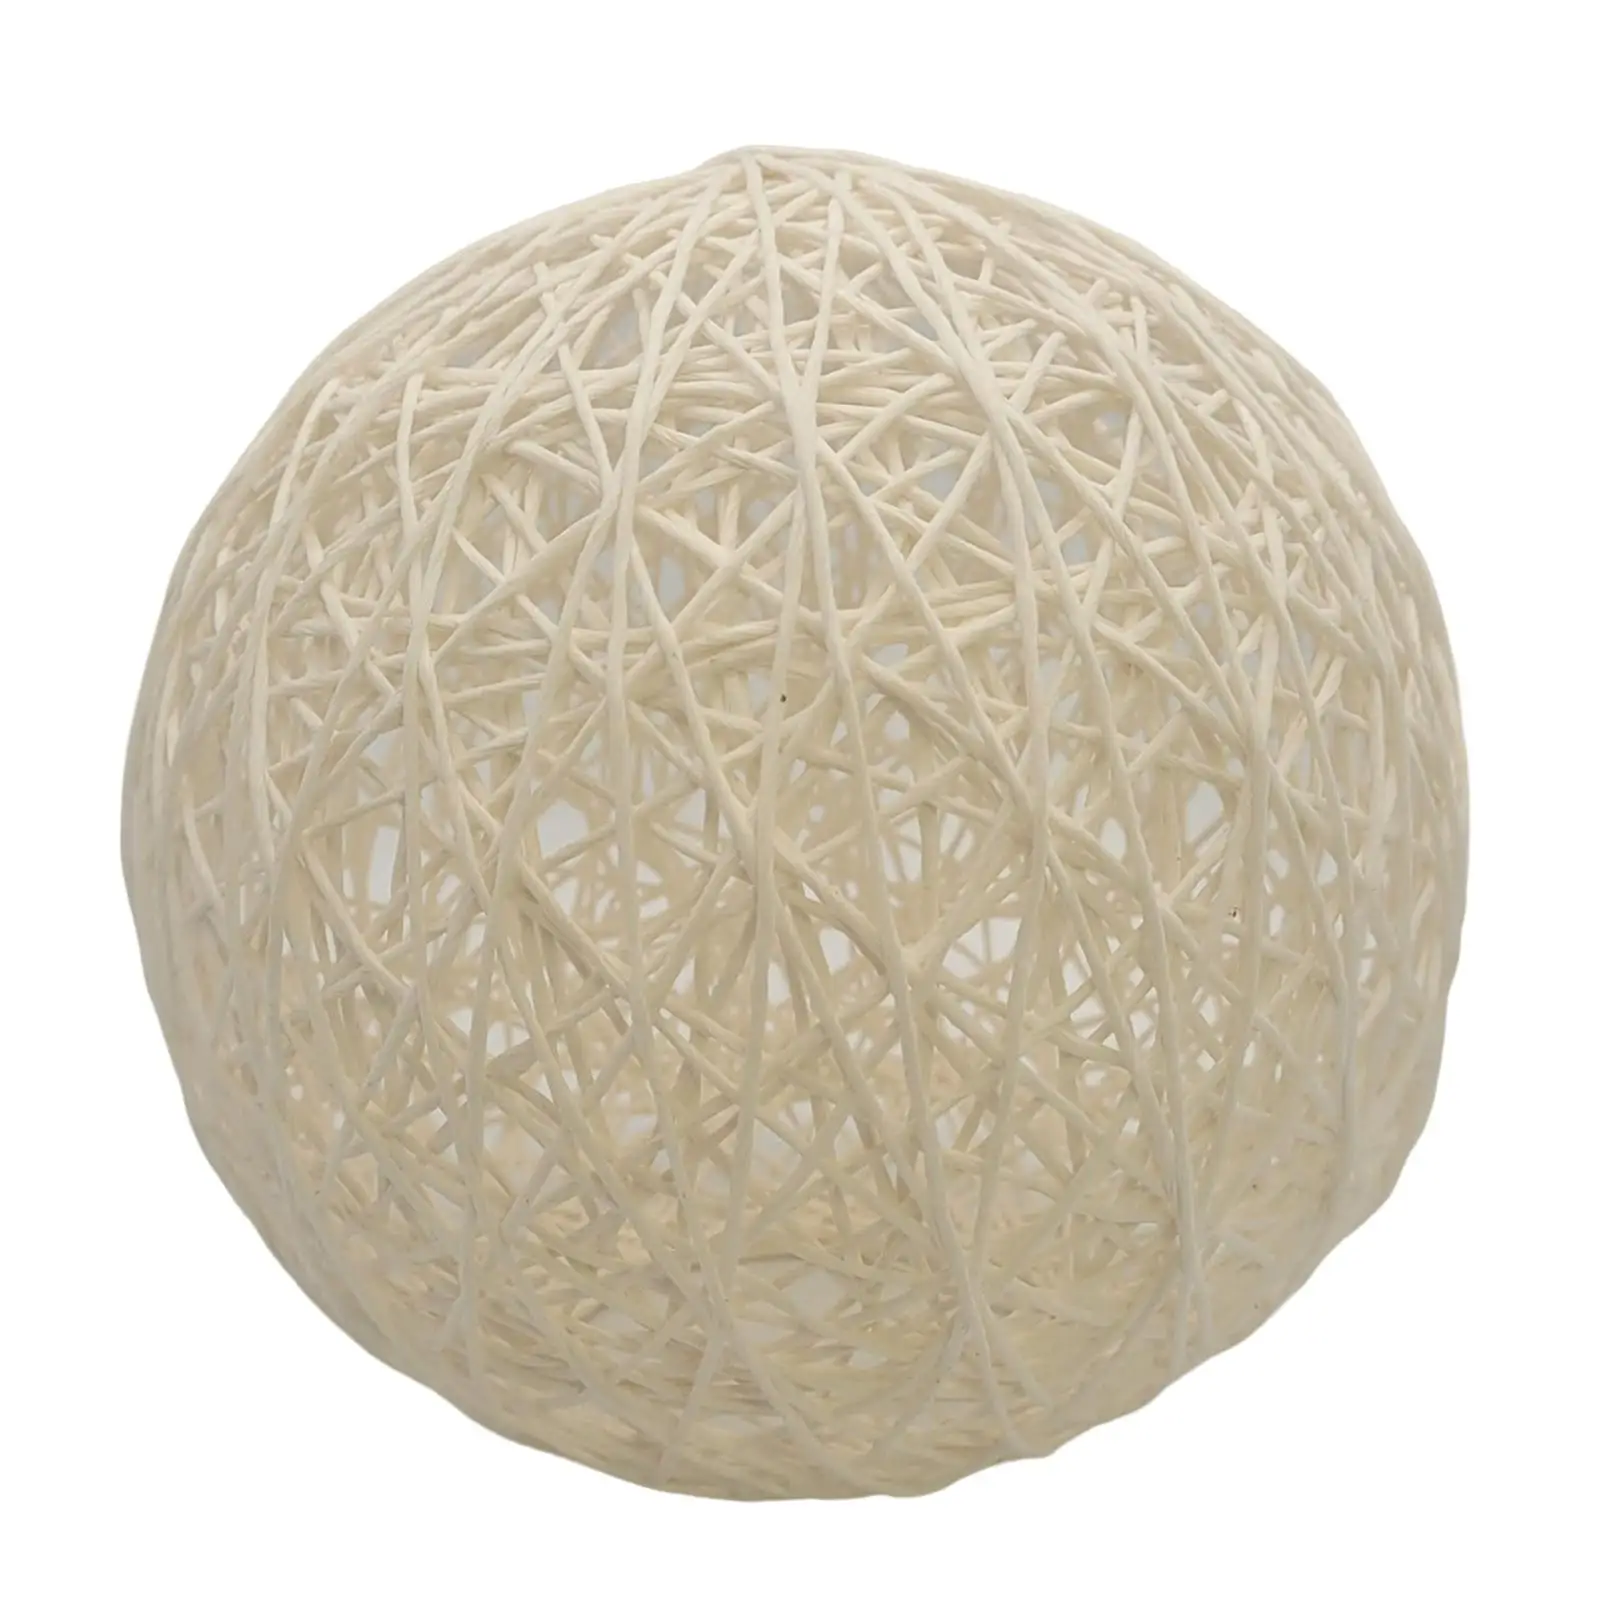 Ceiling Pendant Light Shade Chandelier Lamp Shade Lamp Holder Lantern Rustic Paper Rope Ball Lampshade for Tea House dining